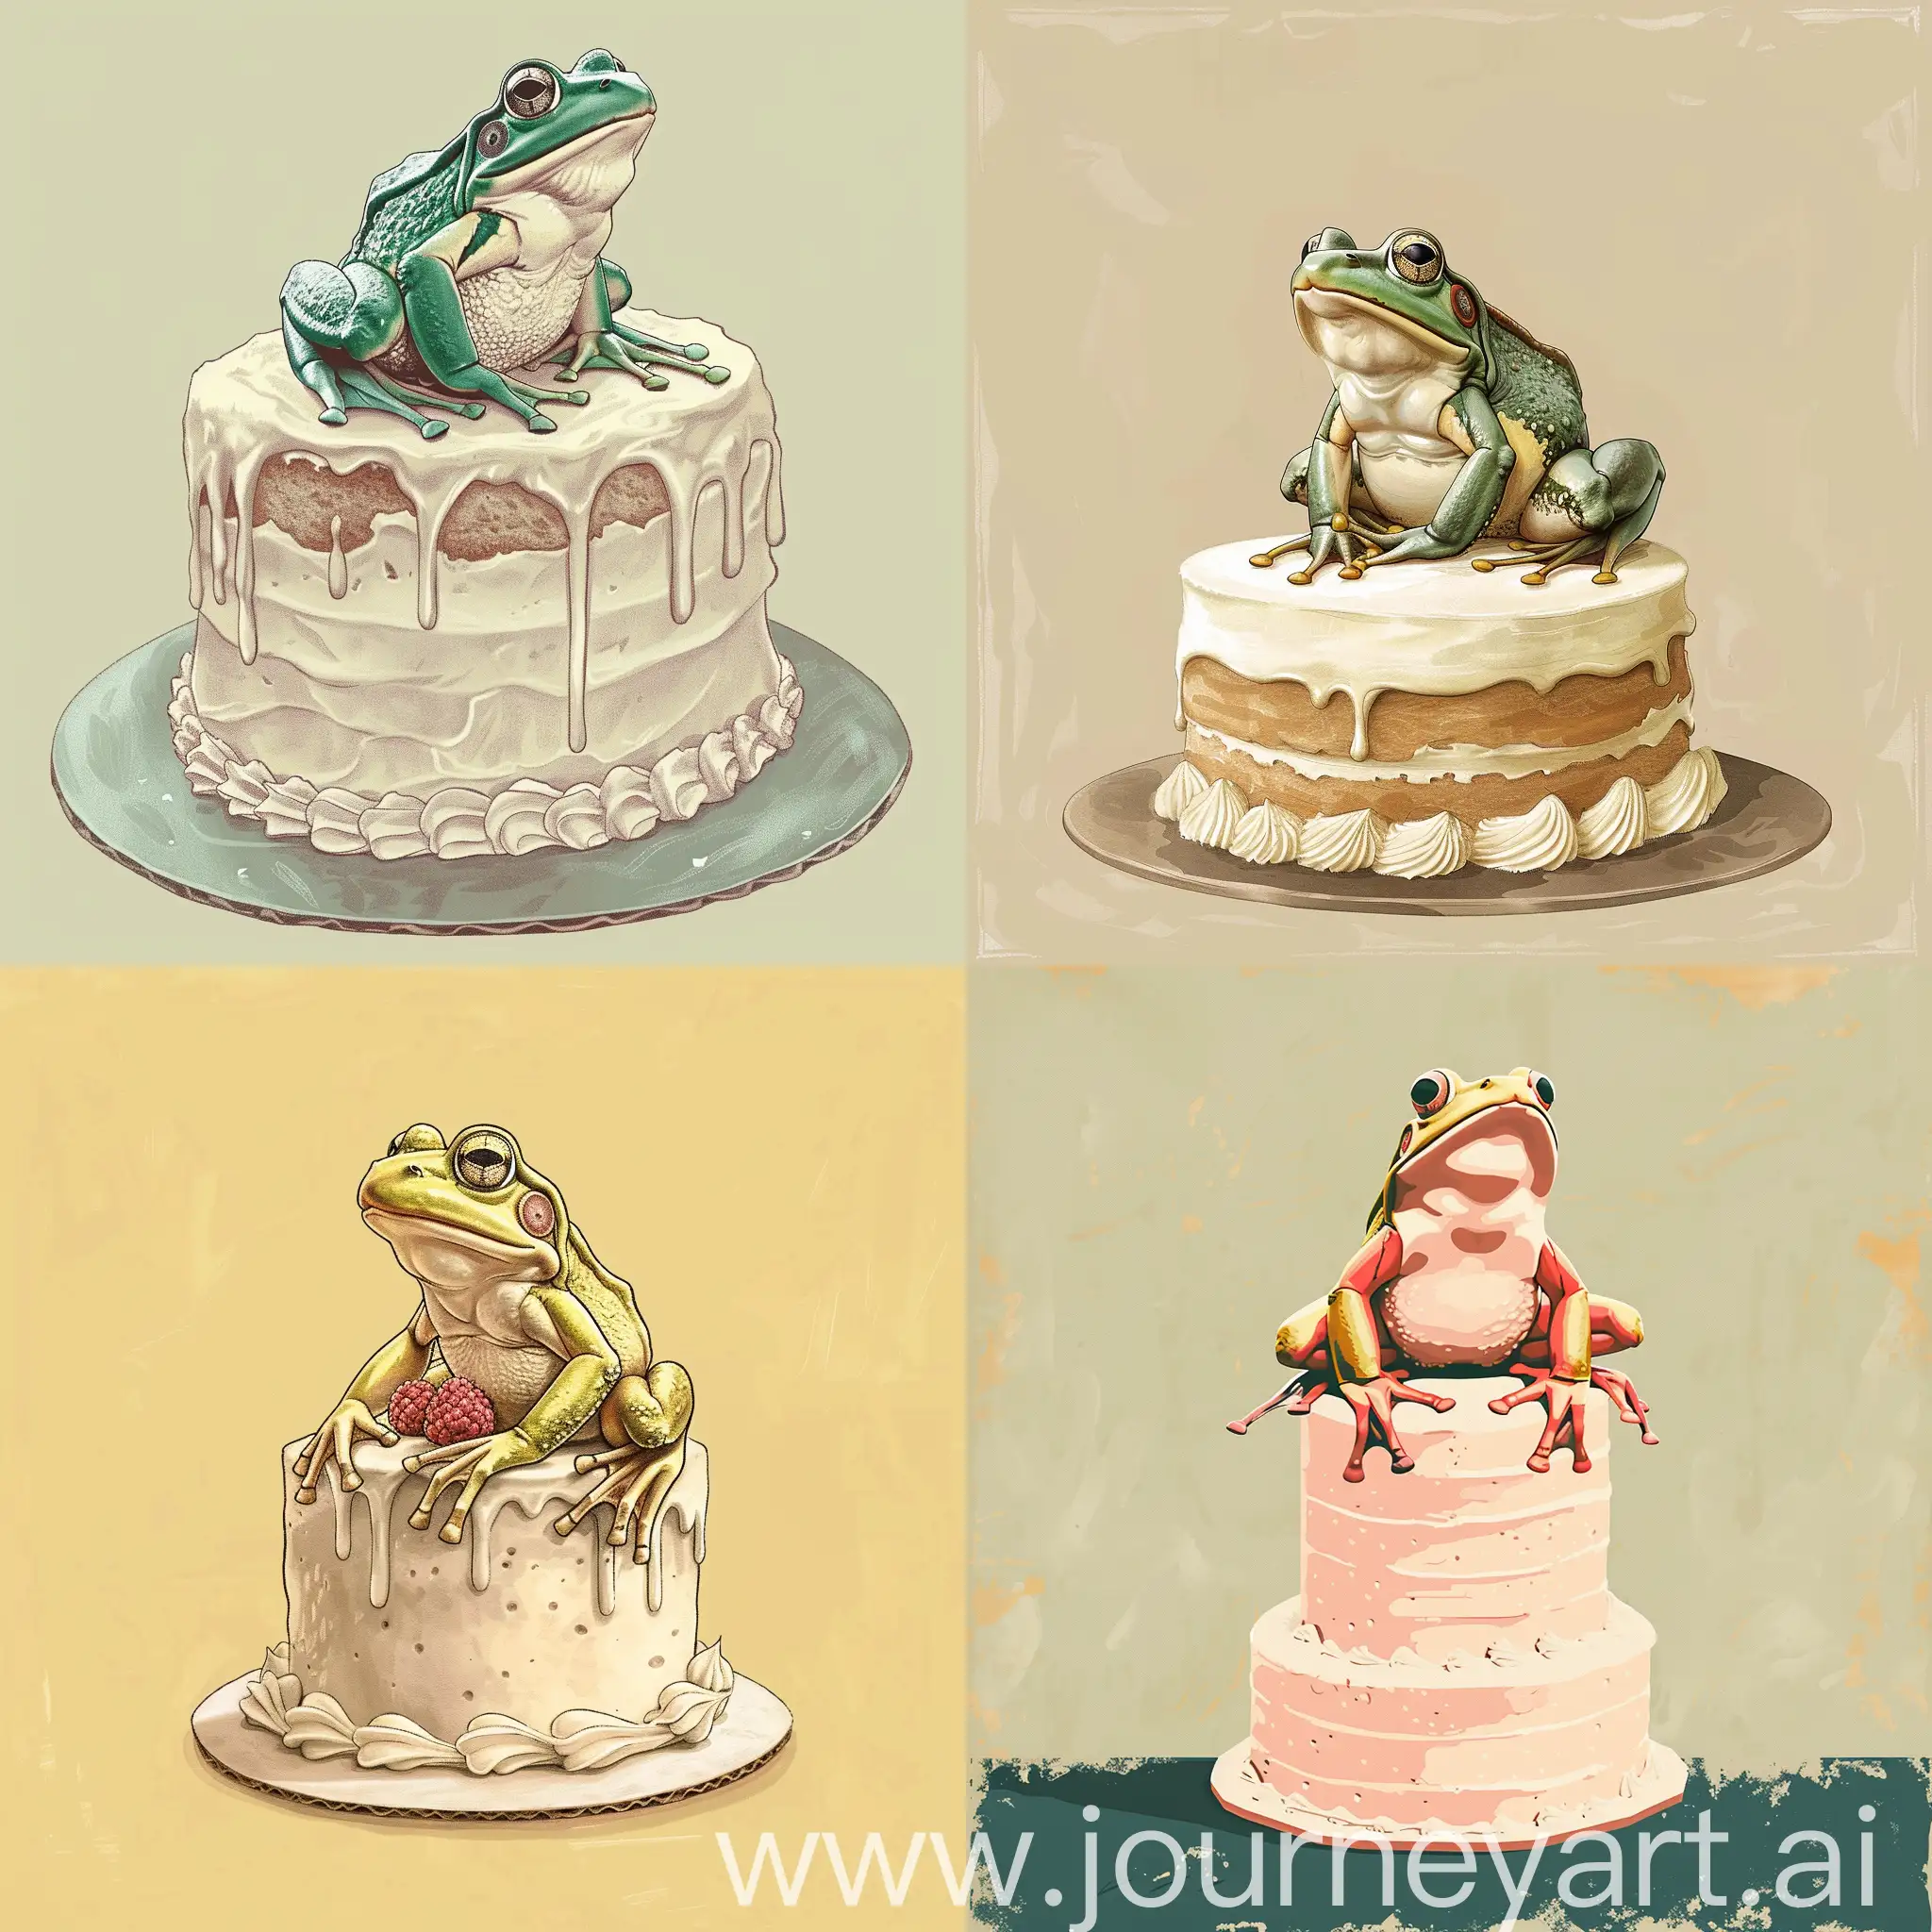 This is an illustration with a frog sitting on a cake